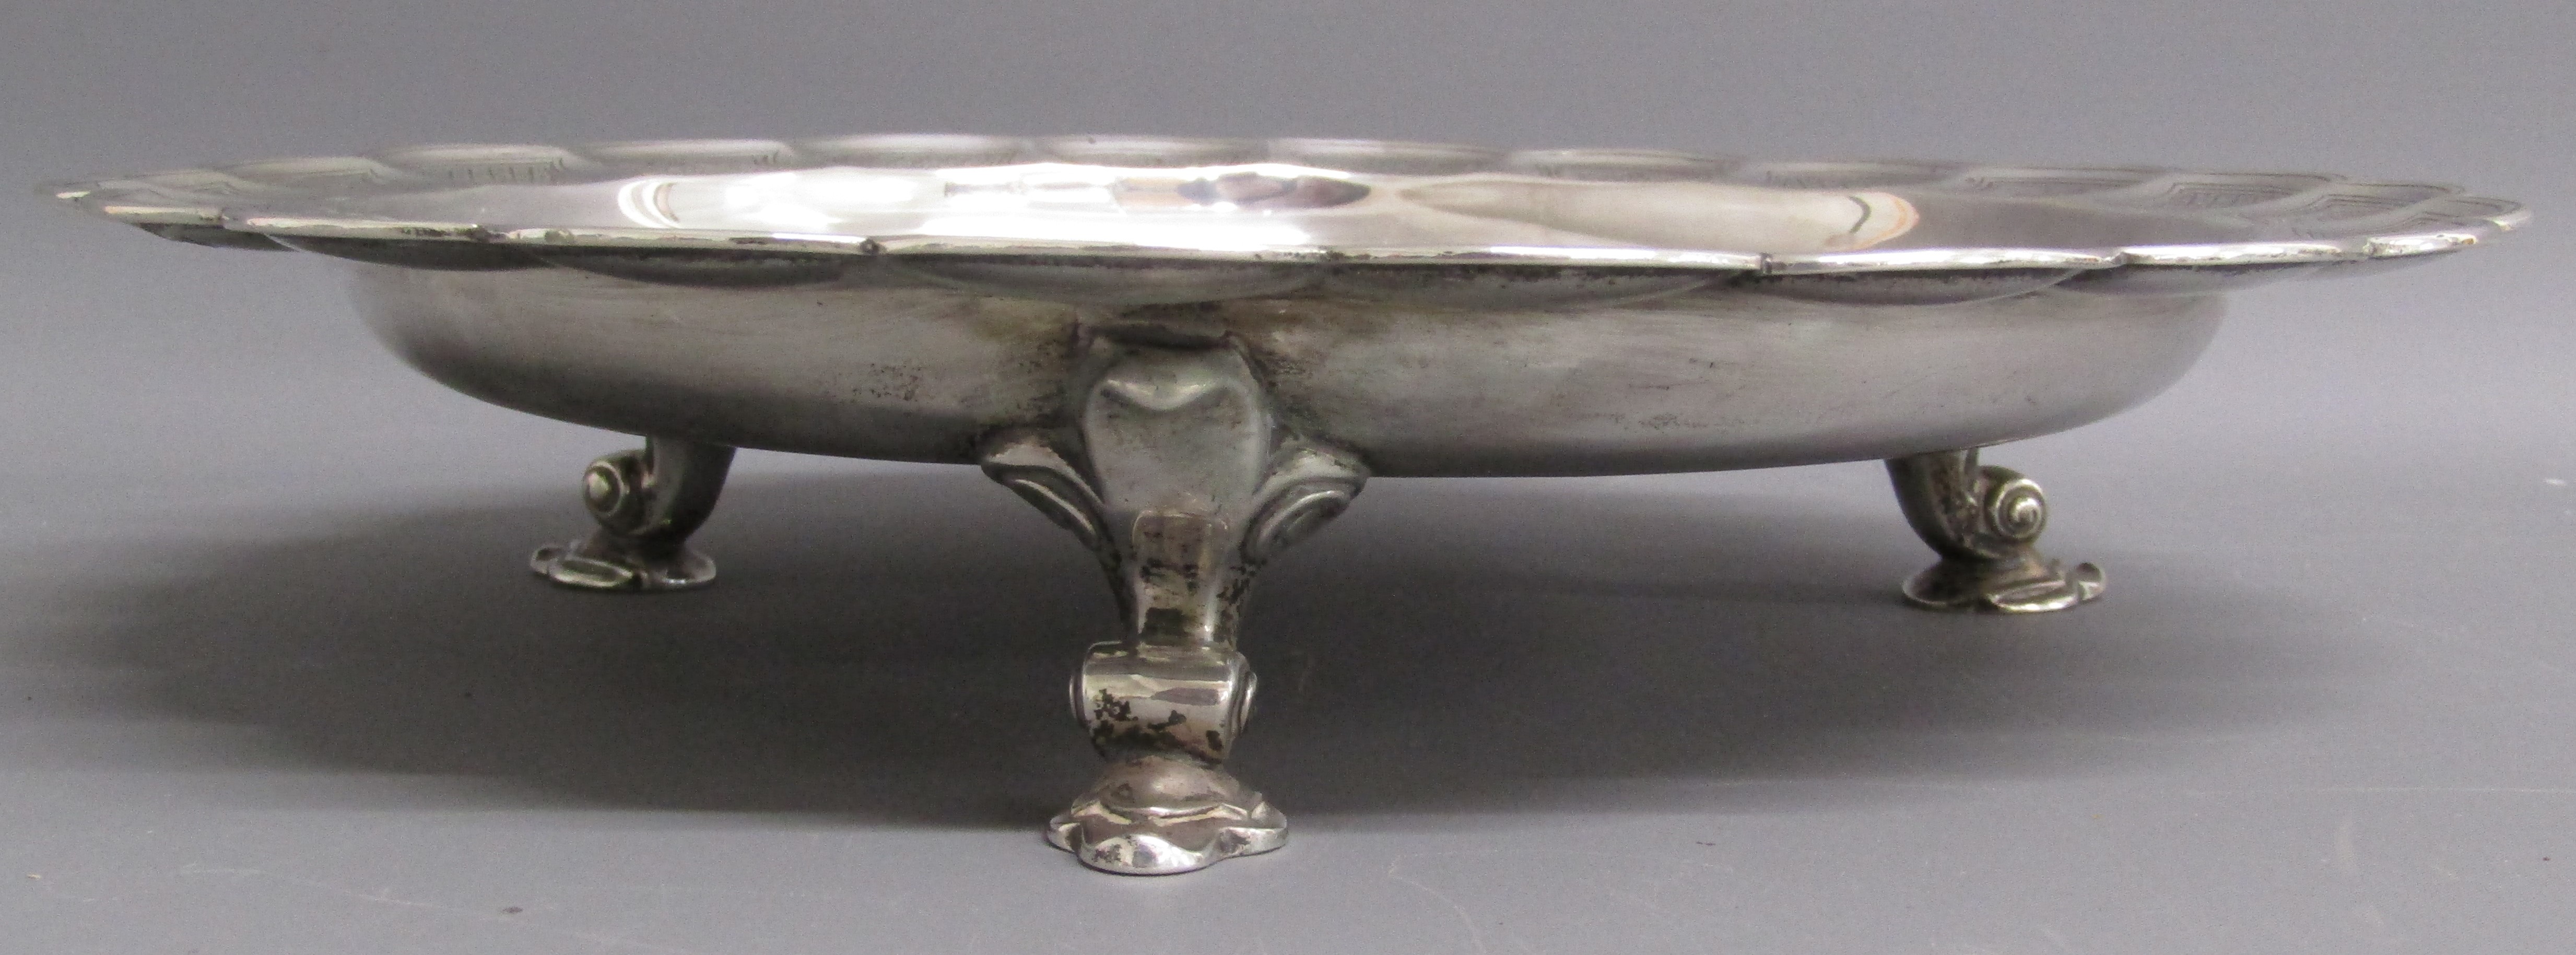 Charles Richard Comyns London 1919 footed silver salver - approx 26cm dia. & 900g/28.93ozt - Image 4 of 6